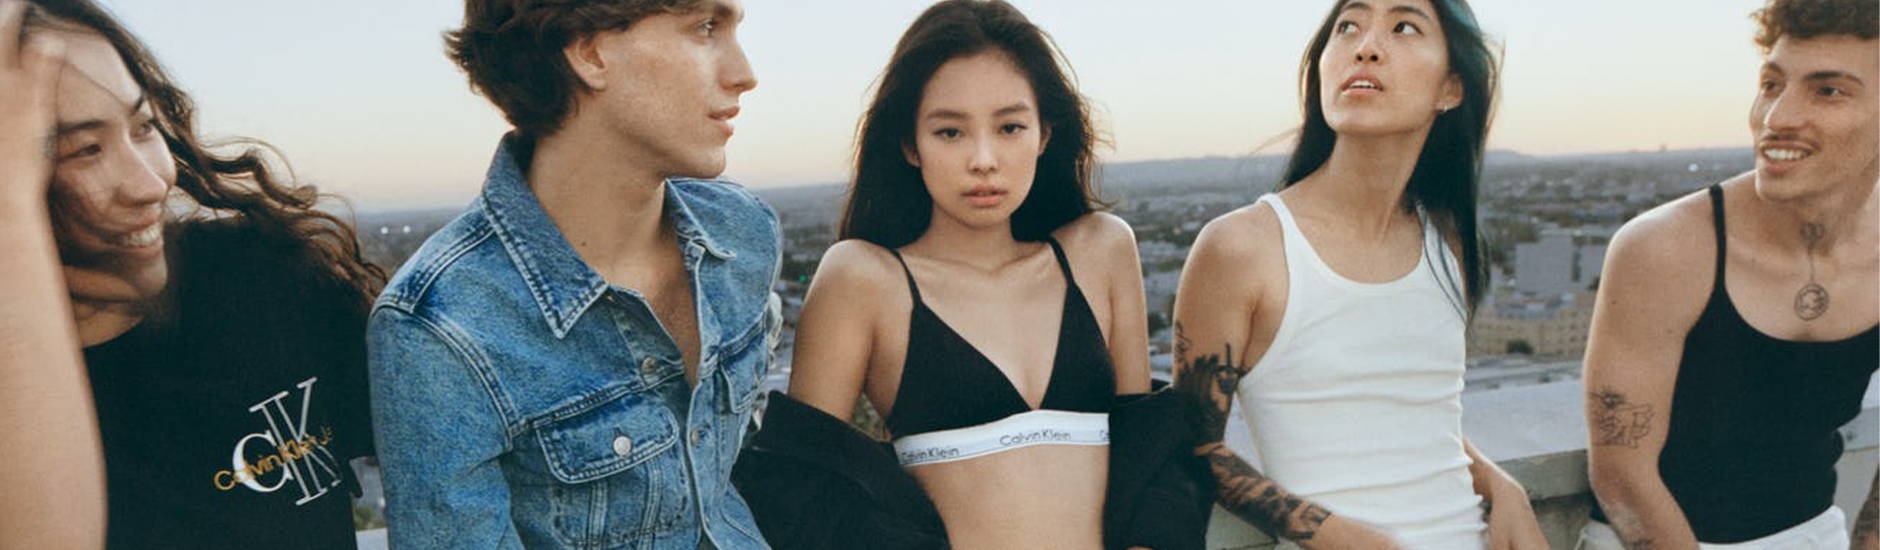 Calvin Klein: It's All About The Community